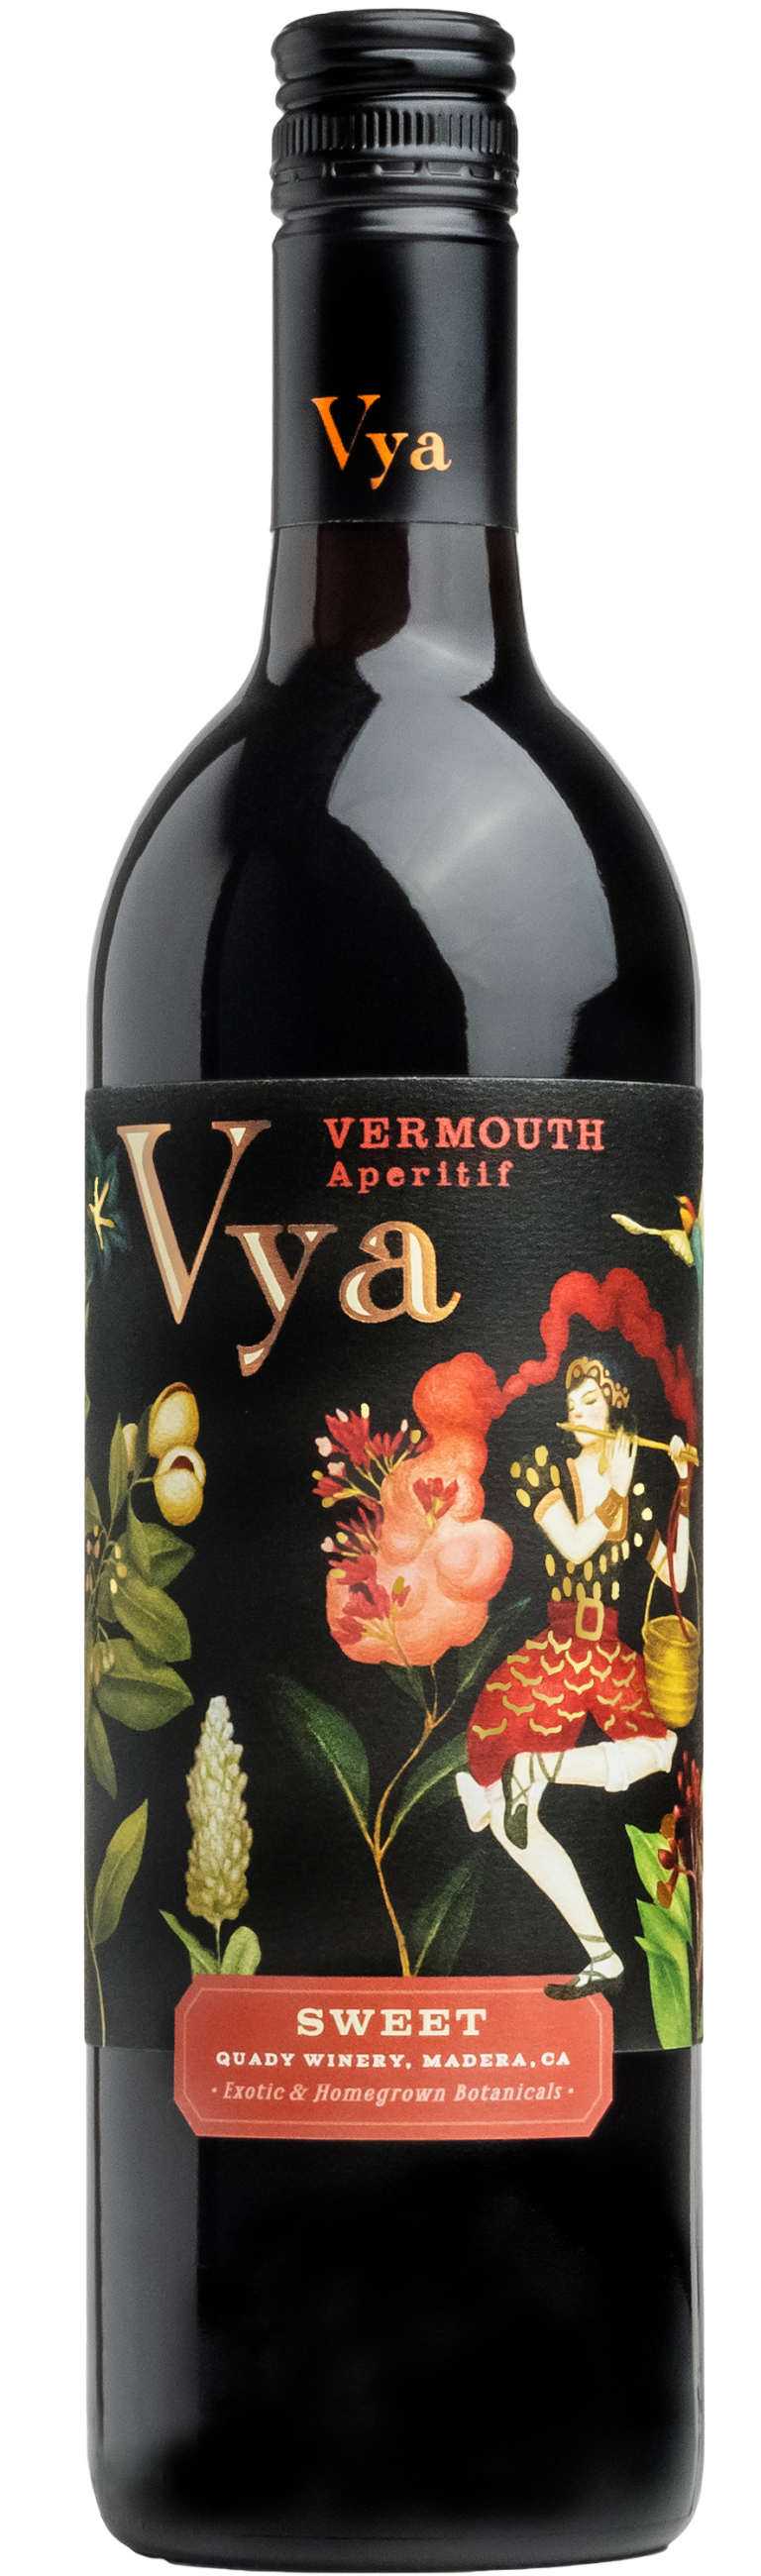 Vya Sweet Vermouth bottle